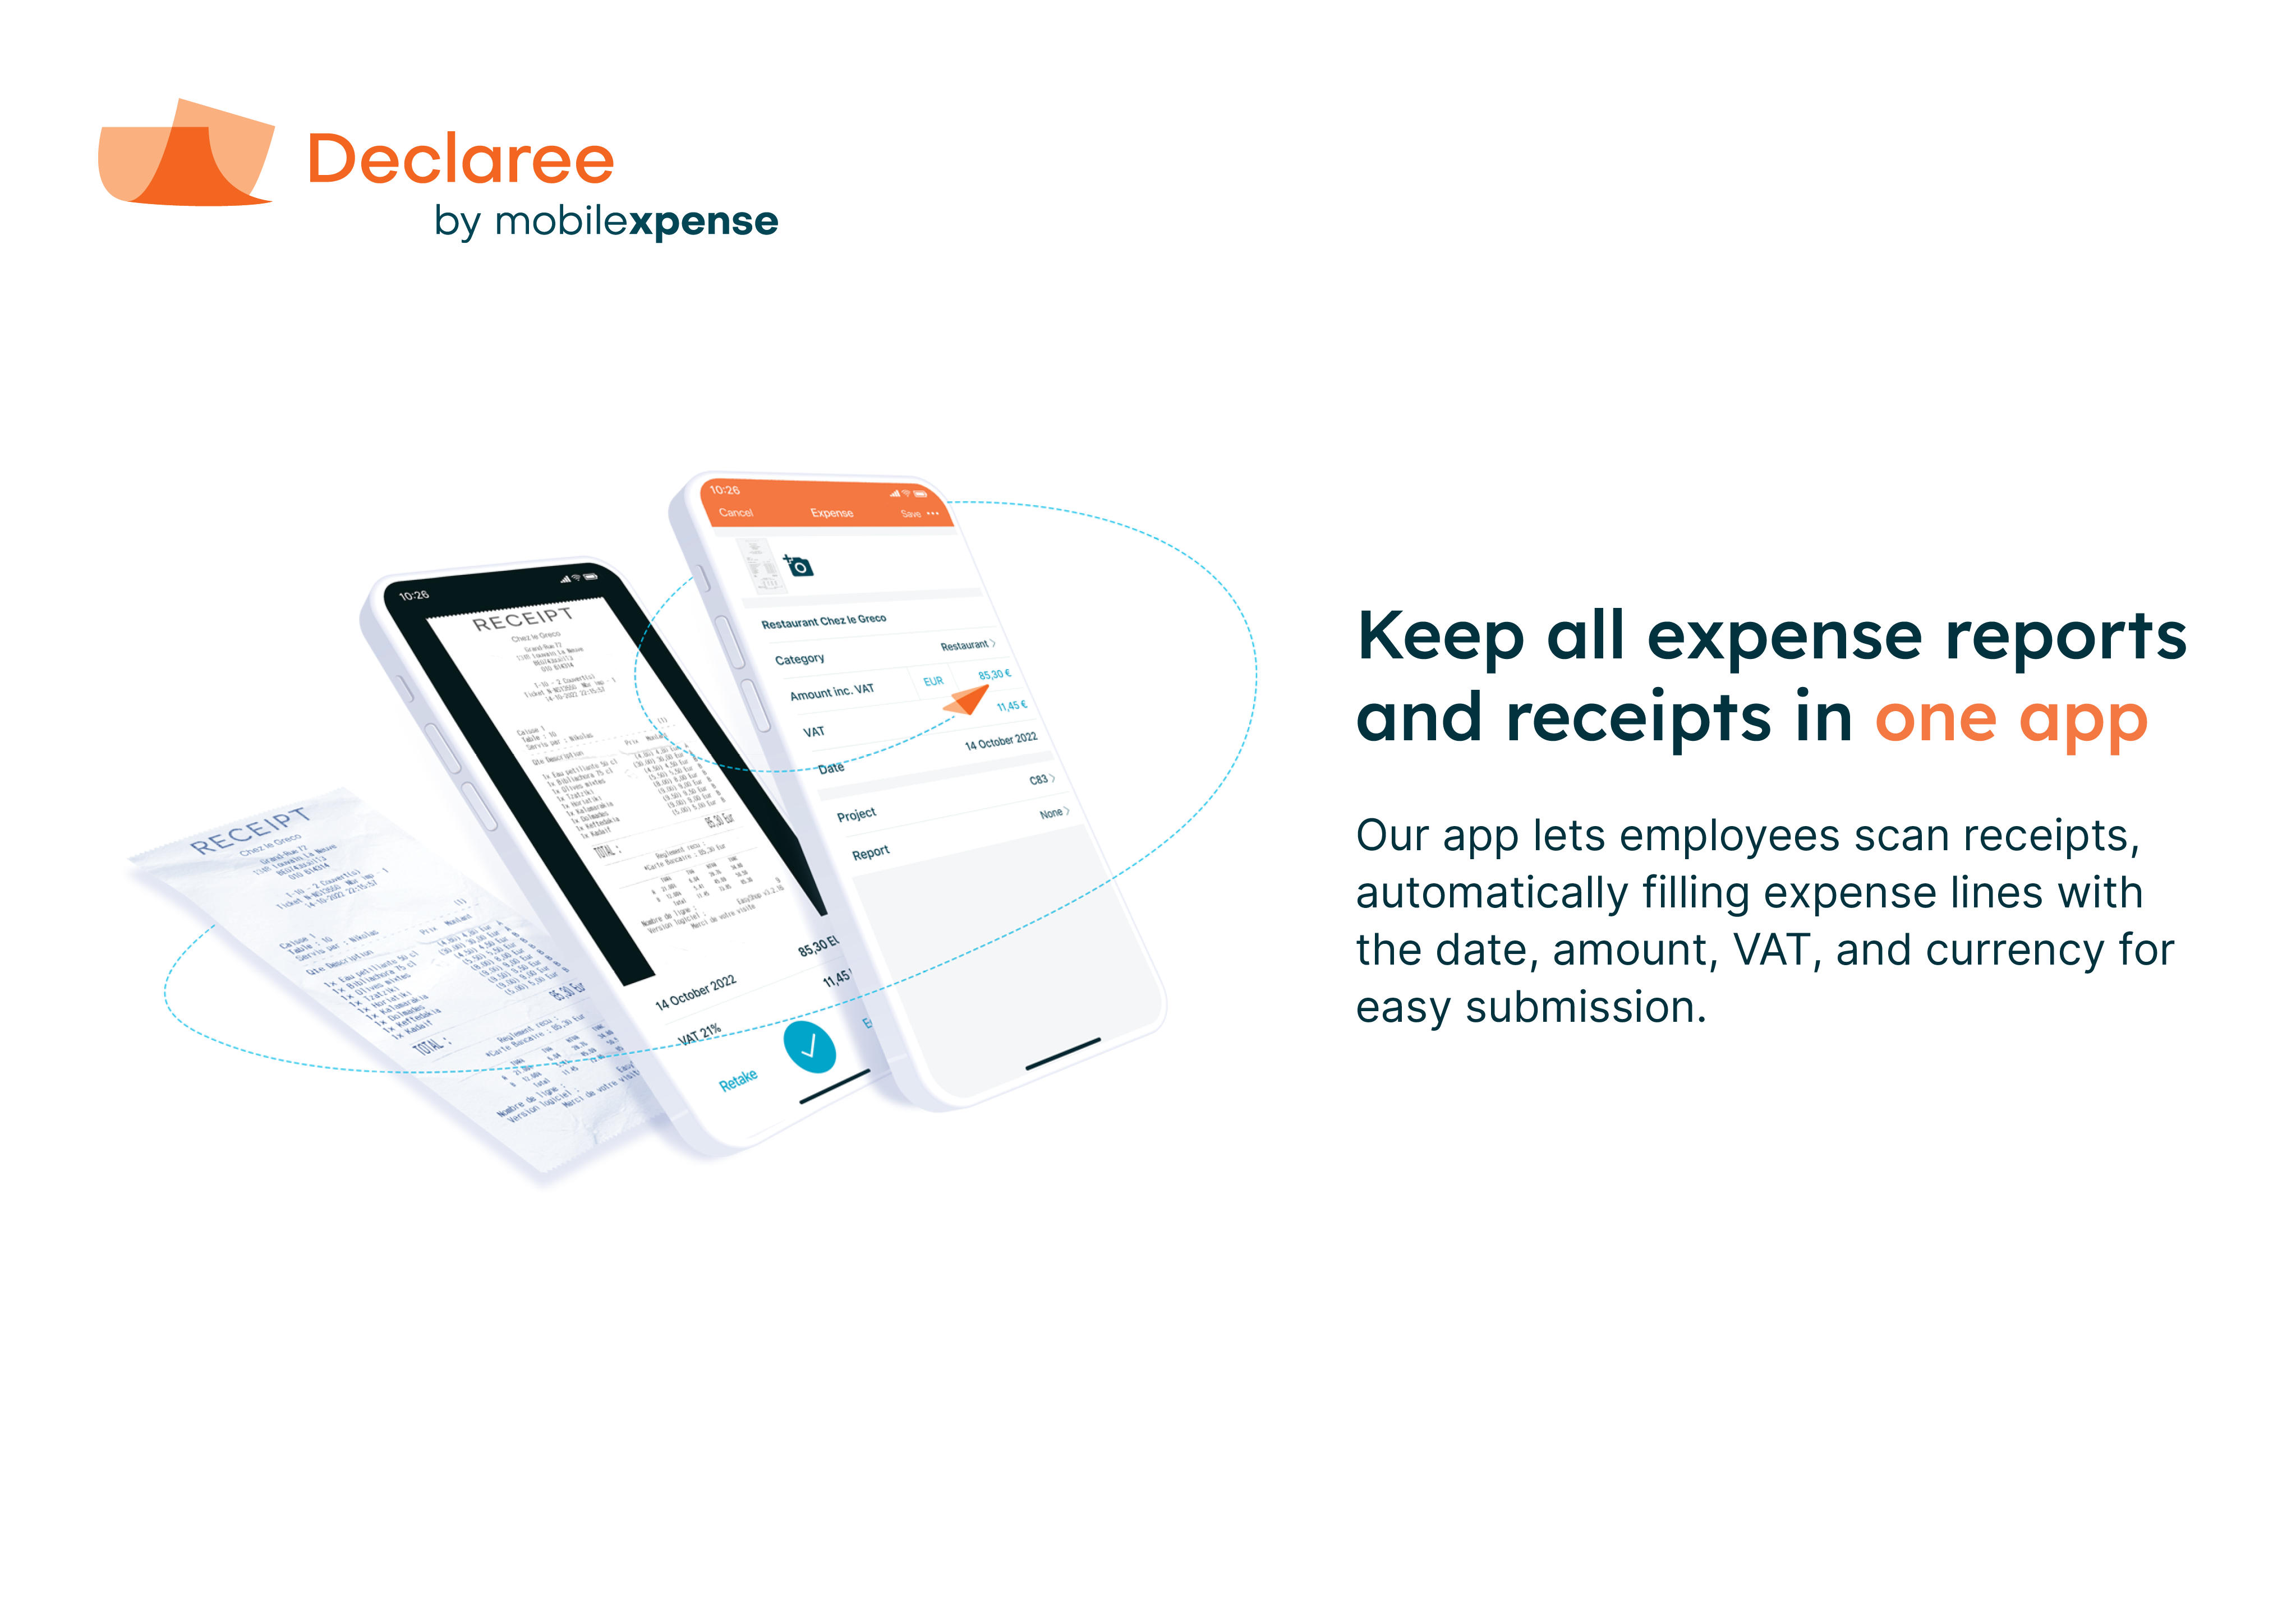 Never lose another receipt. Our app allows employees to scan receipts, add mileages and daily allowances, and submit travel and expense reports.